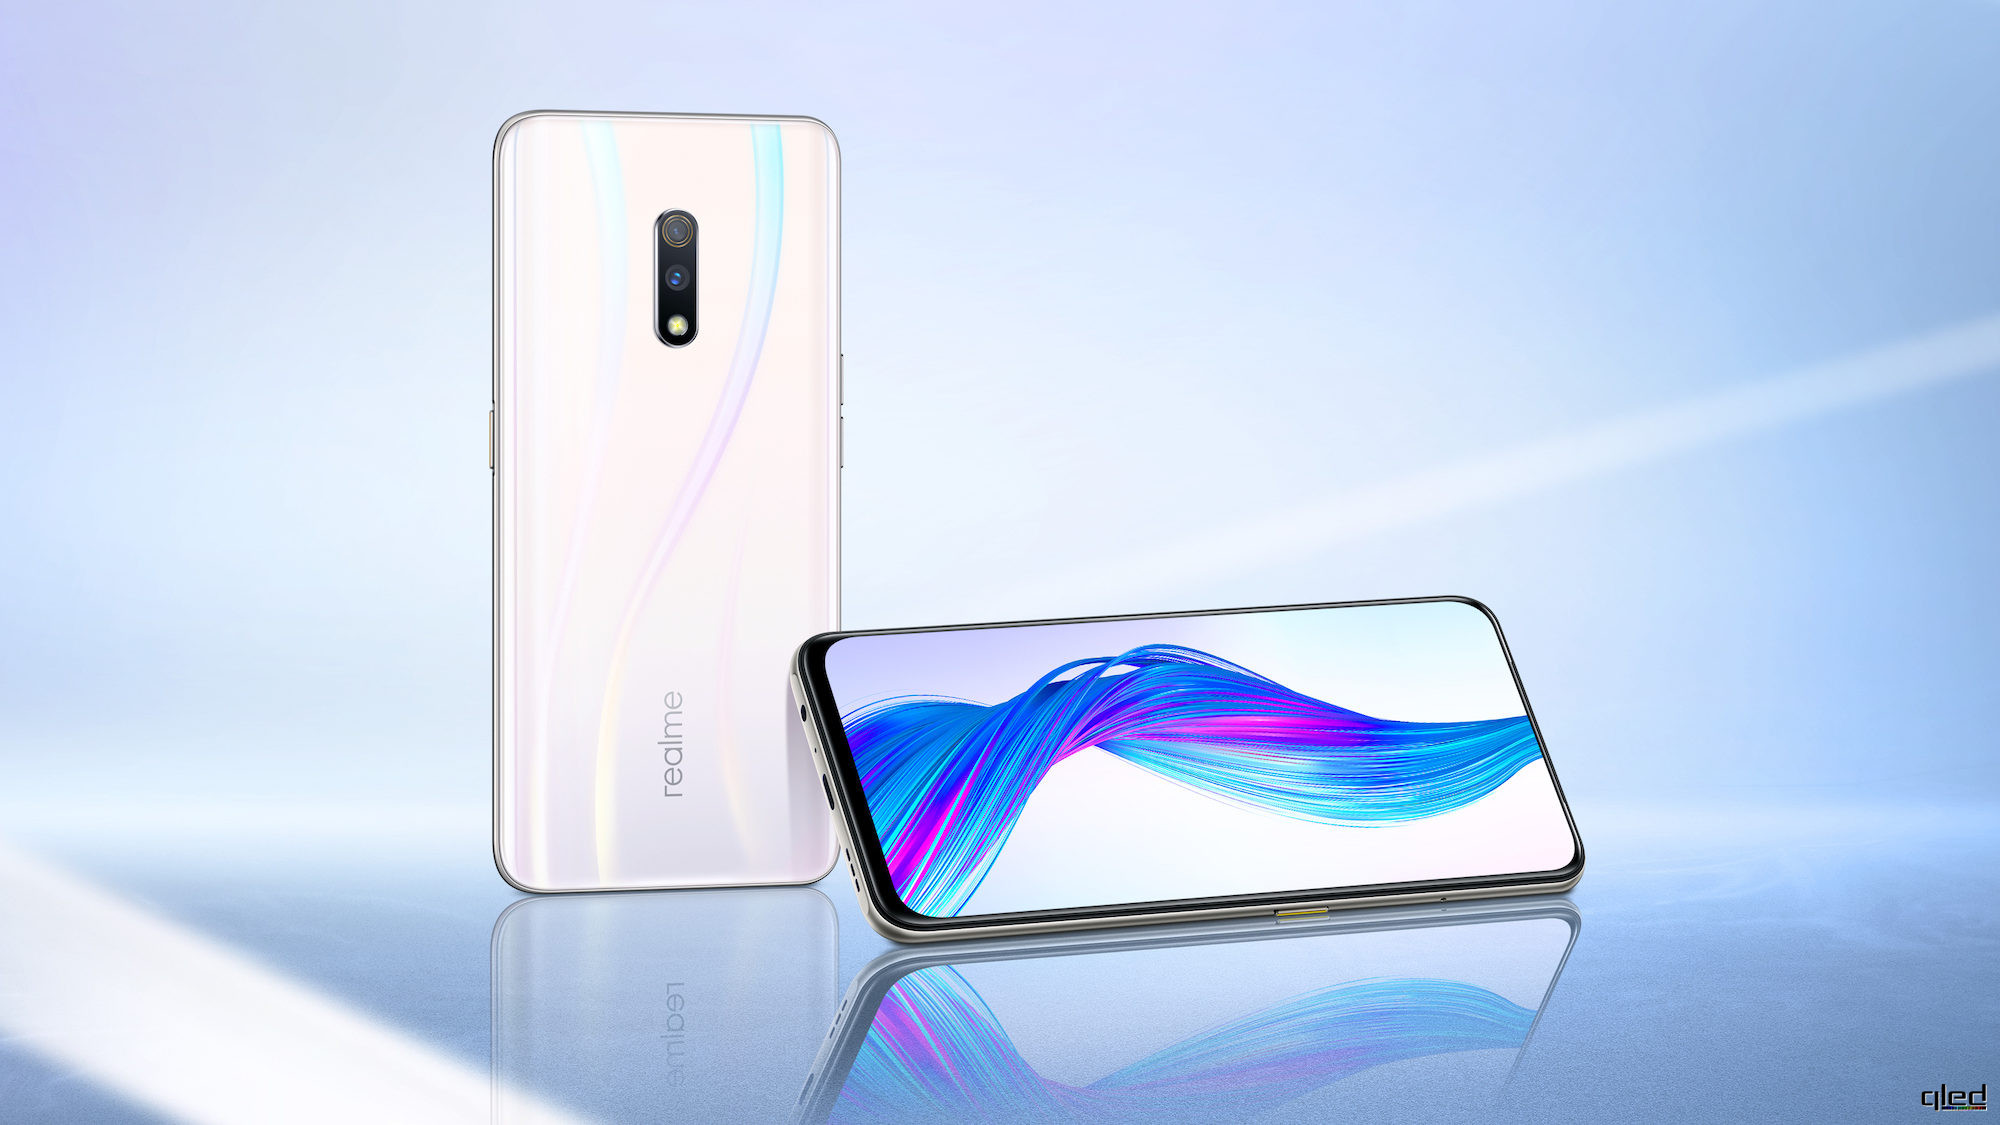 Realme X, Realme 6, Realme 6i and Realme Narzo 10A smartphones have finally started updating to Realme UI 2.0 powered by Android 11